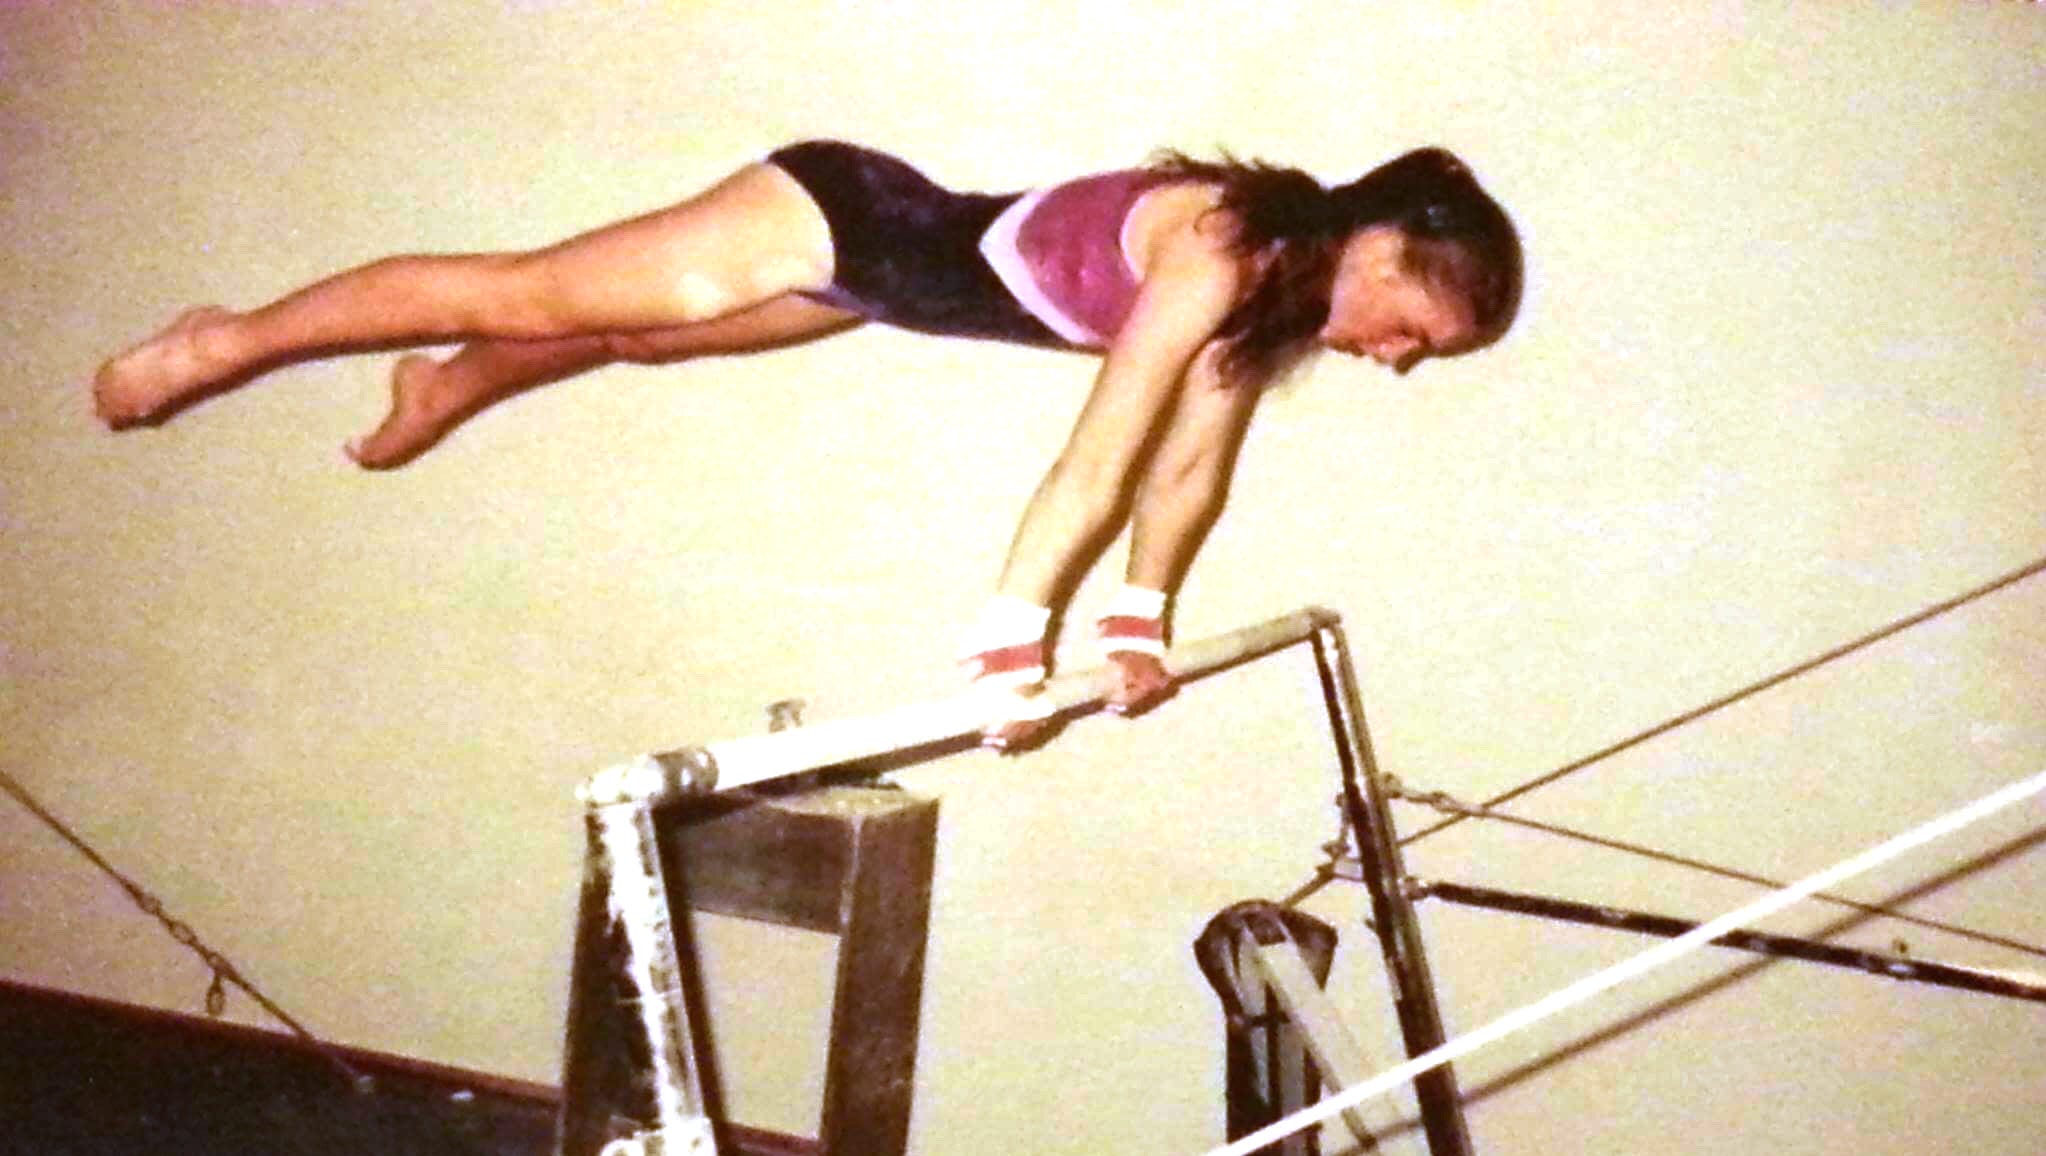 Larry Nassar's life began to unravel in September when a former Kalamazoo woman, Rachael Denhollander, filed a police report and told the Indianapolis Star that Nassar sexually assaulted her during treatments for a gymnastics injury when she was 15. Rachael Denhollander provided this photo of her as a teenage gymnast.